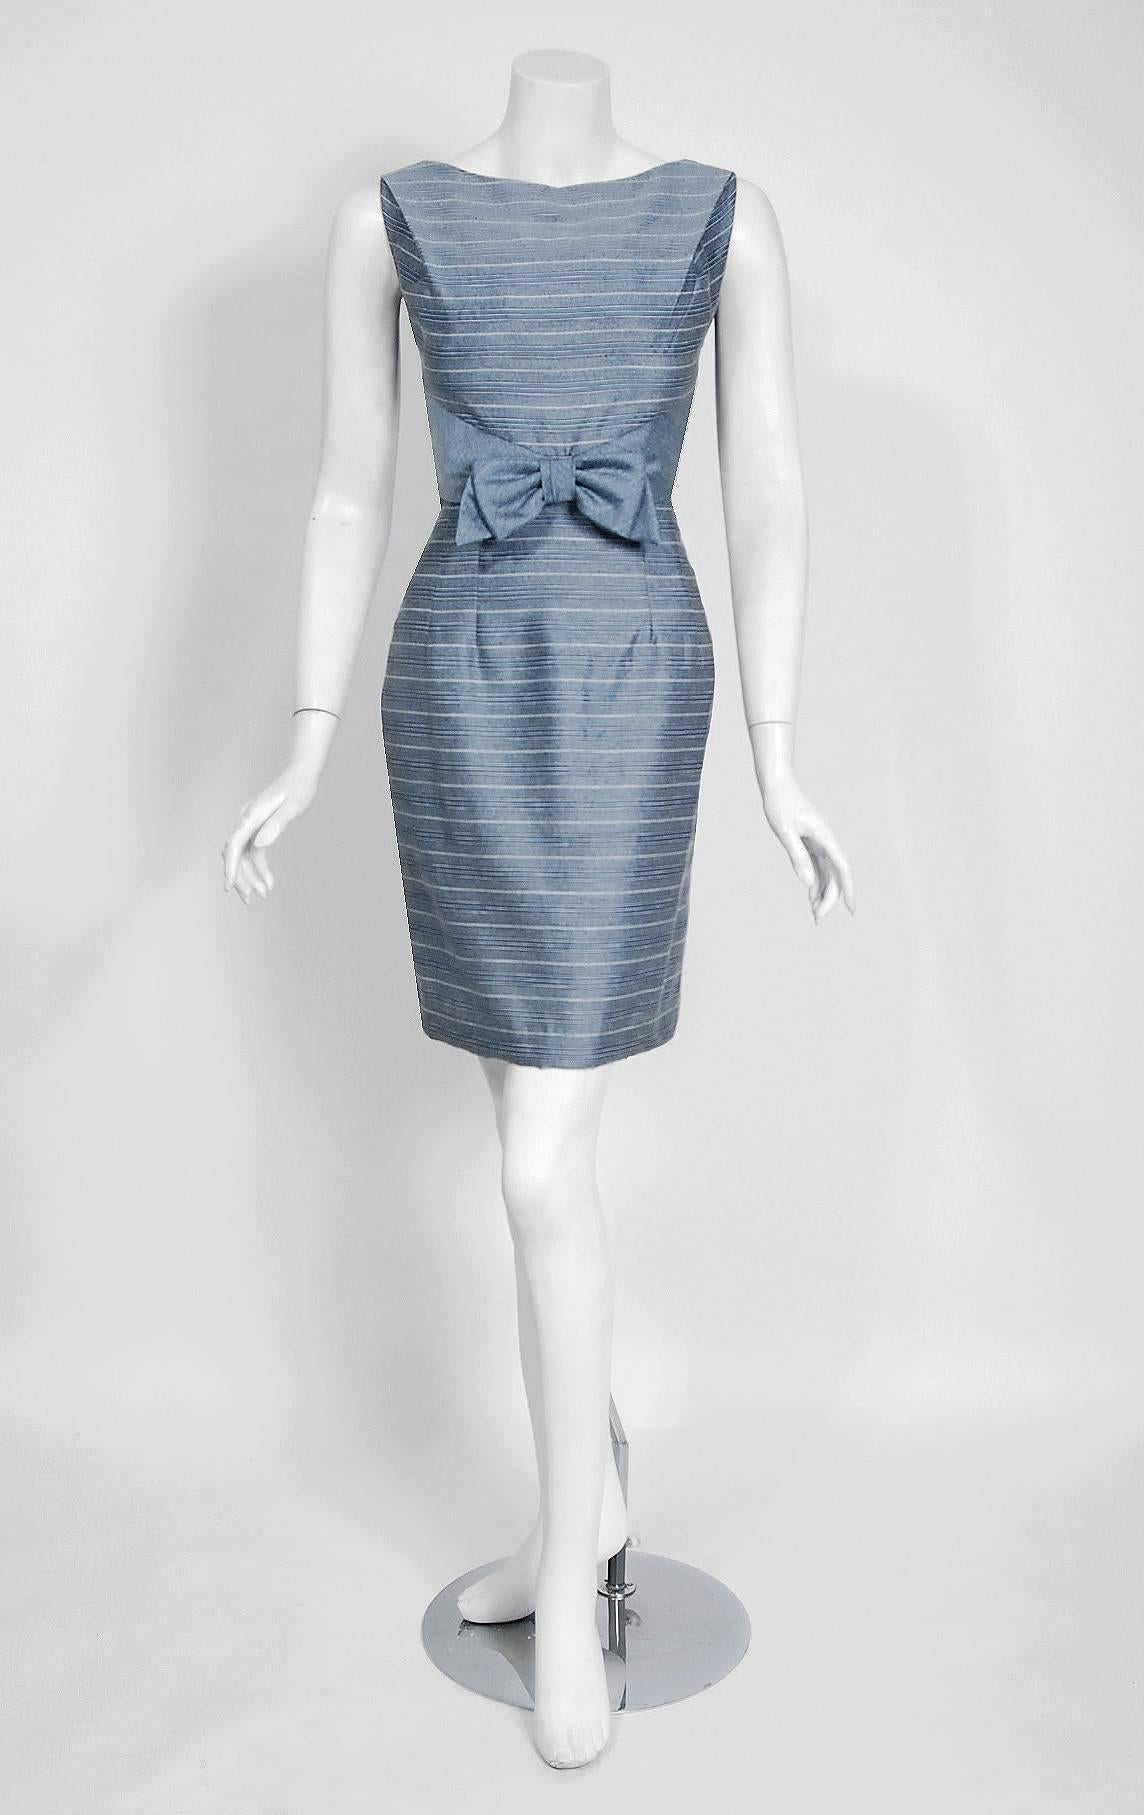 An amazing and highly stylized baby-blue stripe woven silk cocktail dress ensemble dating back to the early 1960's. The silhouette is classic pin-up "femme fatale"; the skirt is deliciously lean! The bodice is an ultra chic boat-neck